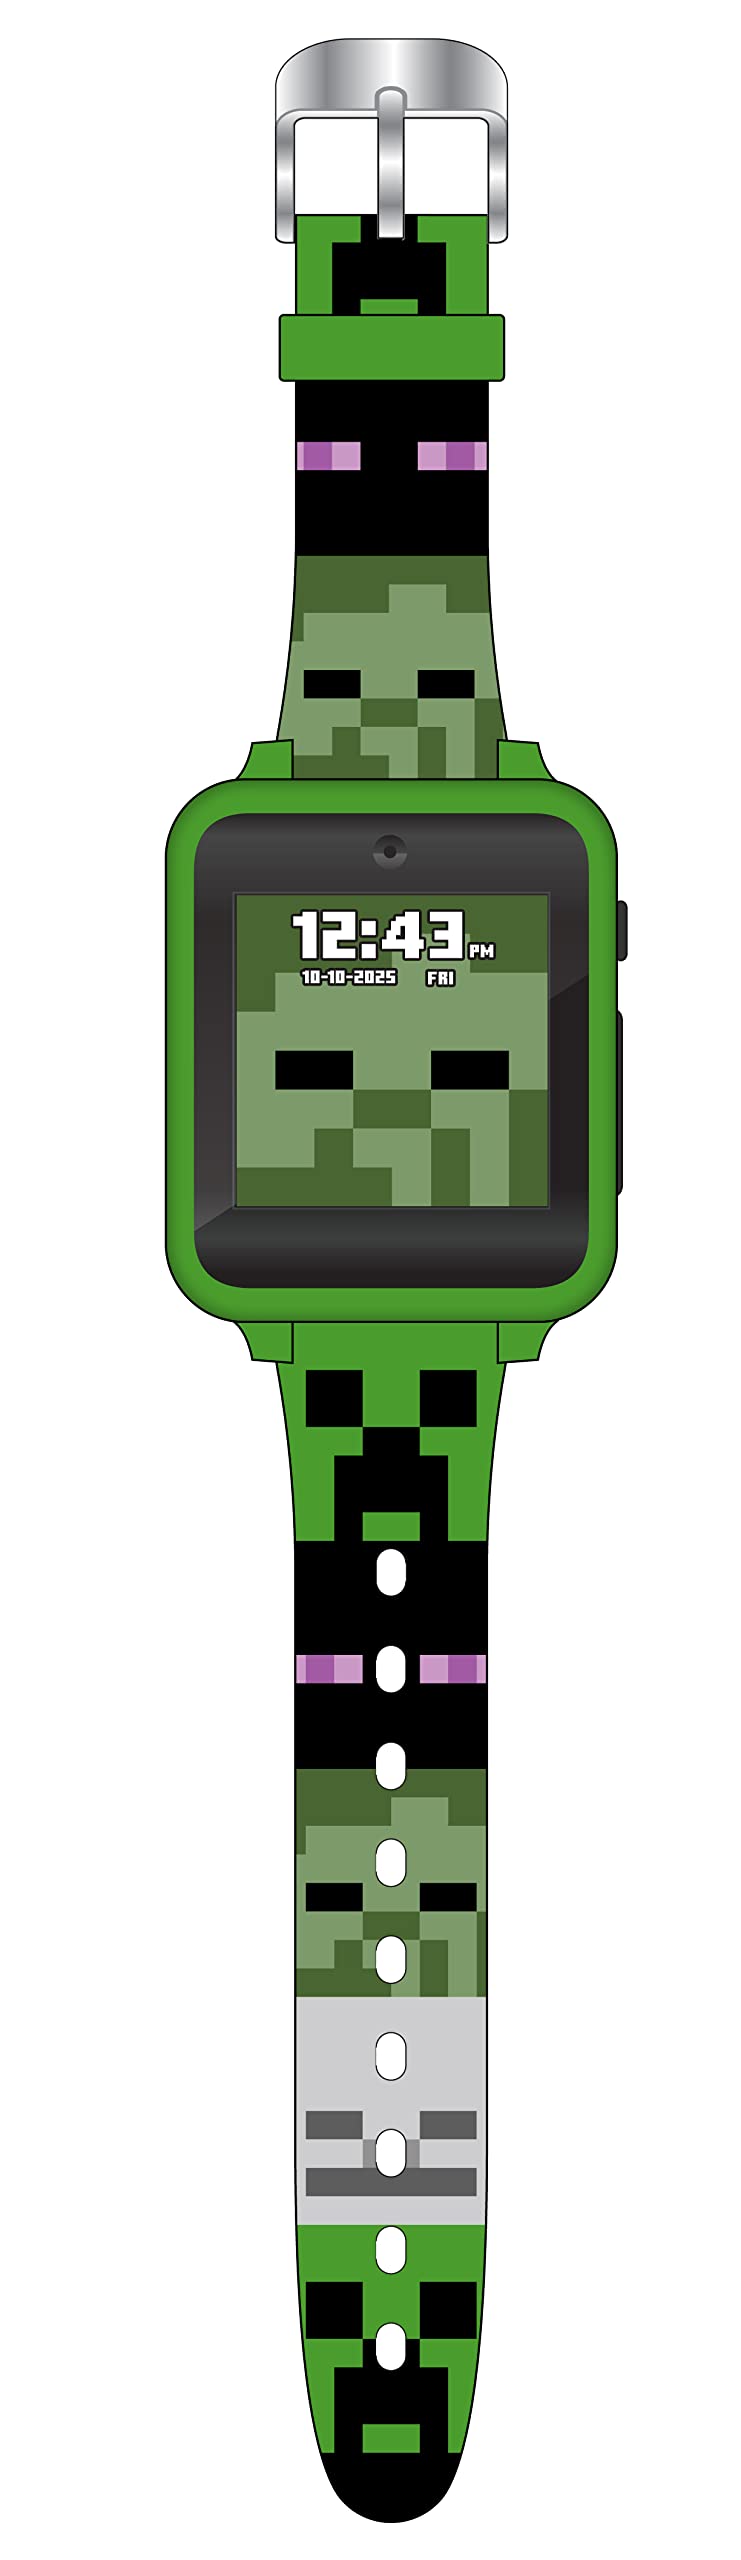 Accutime Minecraft Kids Green Educational Learning Touchscreen Smart Watch Toy for Girls, Boys, Toddlers - Selfie Cam, Learning Games, Alarm, Calculator, Pedometer & More (Model: MIN4130AZ)